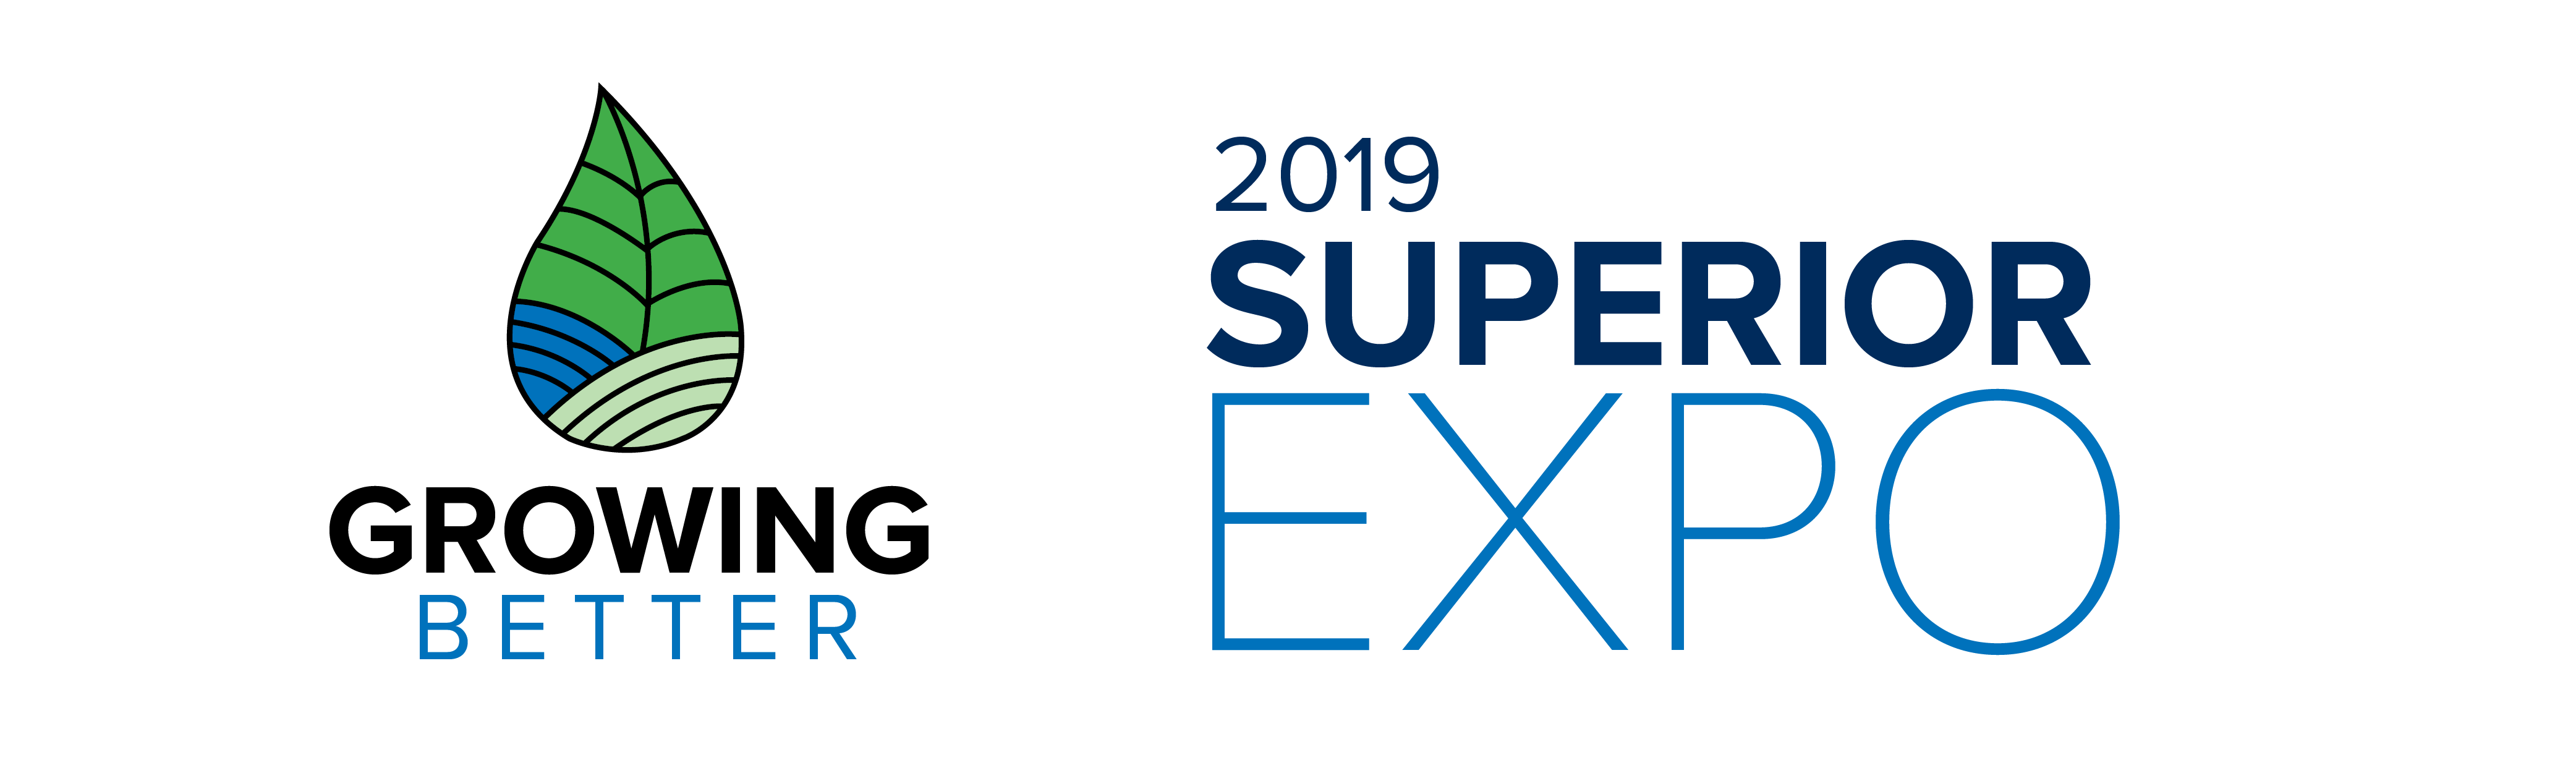 Welcome to Superior Expo 2019!